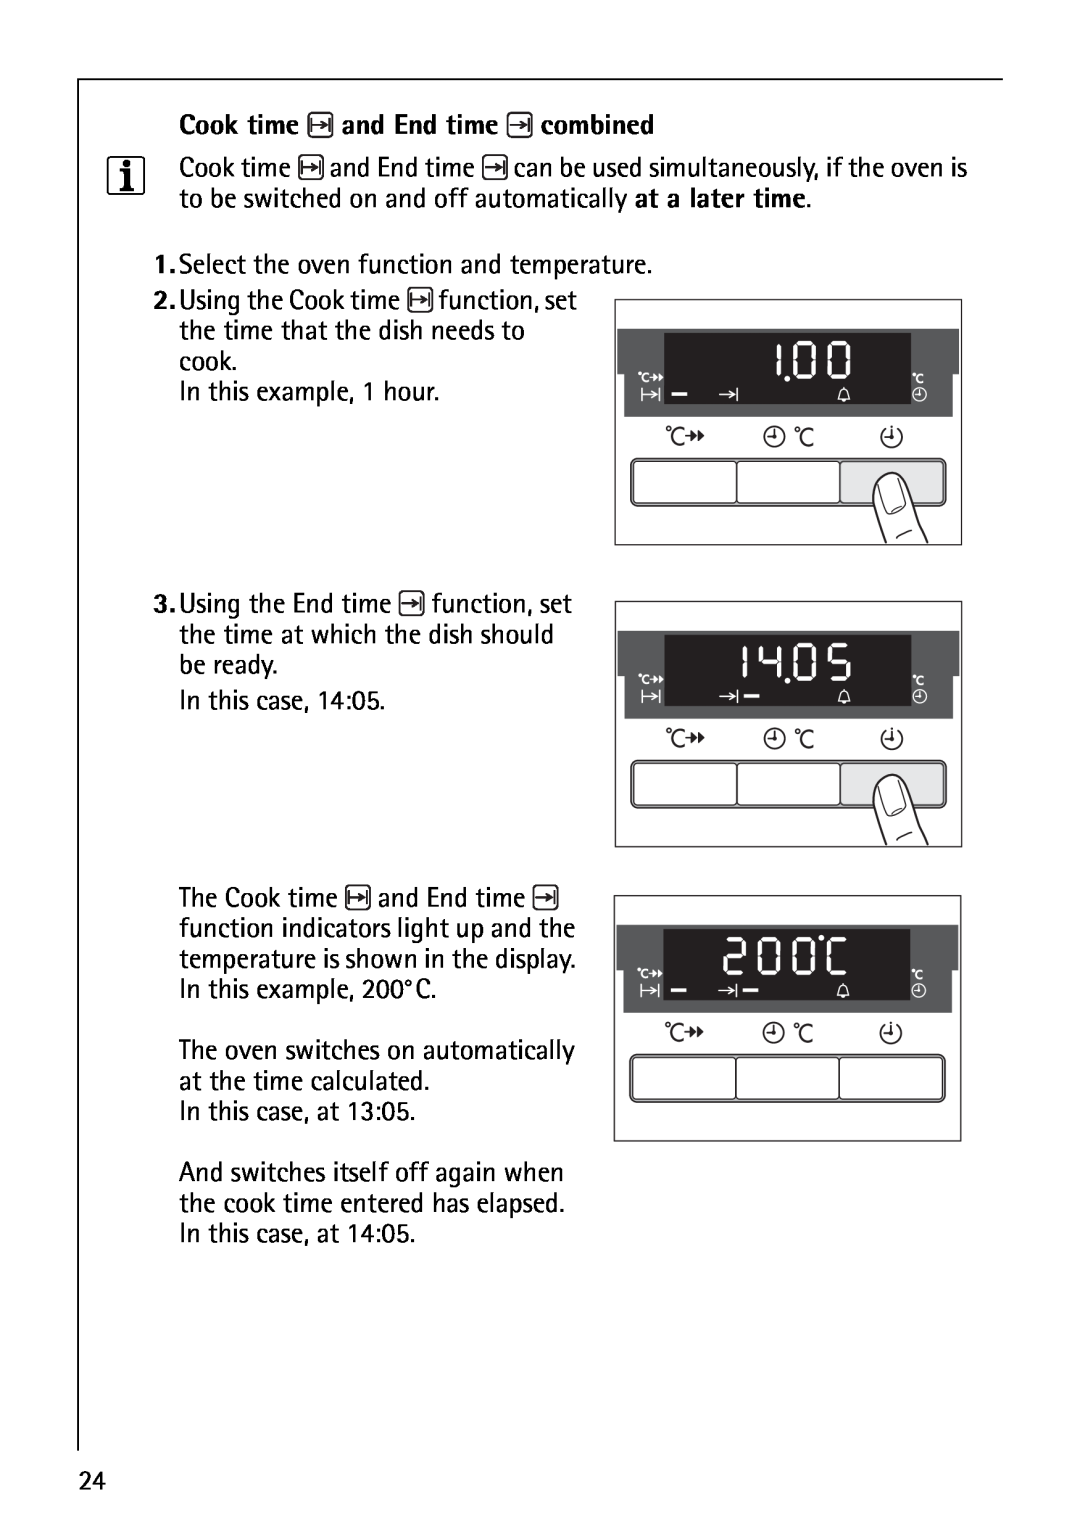 Electrolux B5741-4 Cook time and End time combined, Using the Cook time function, set the time that the dish needs to 